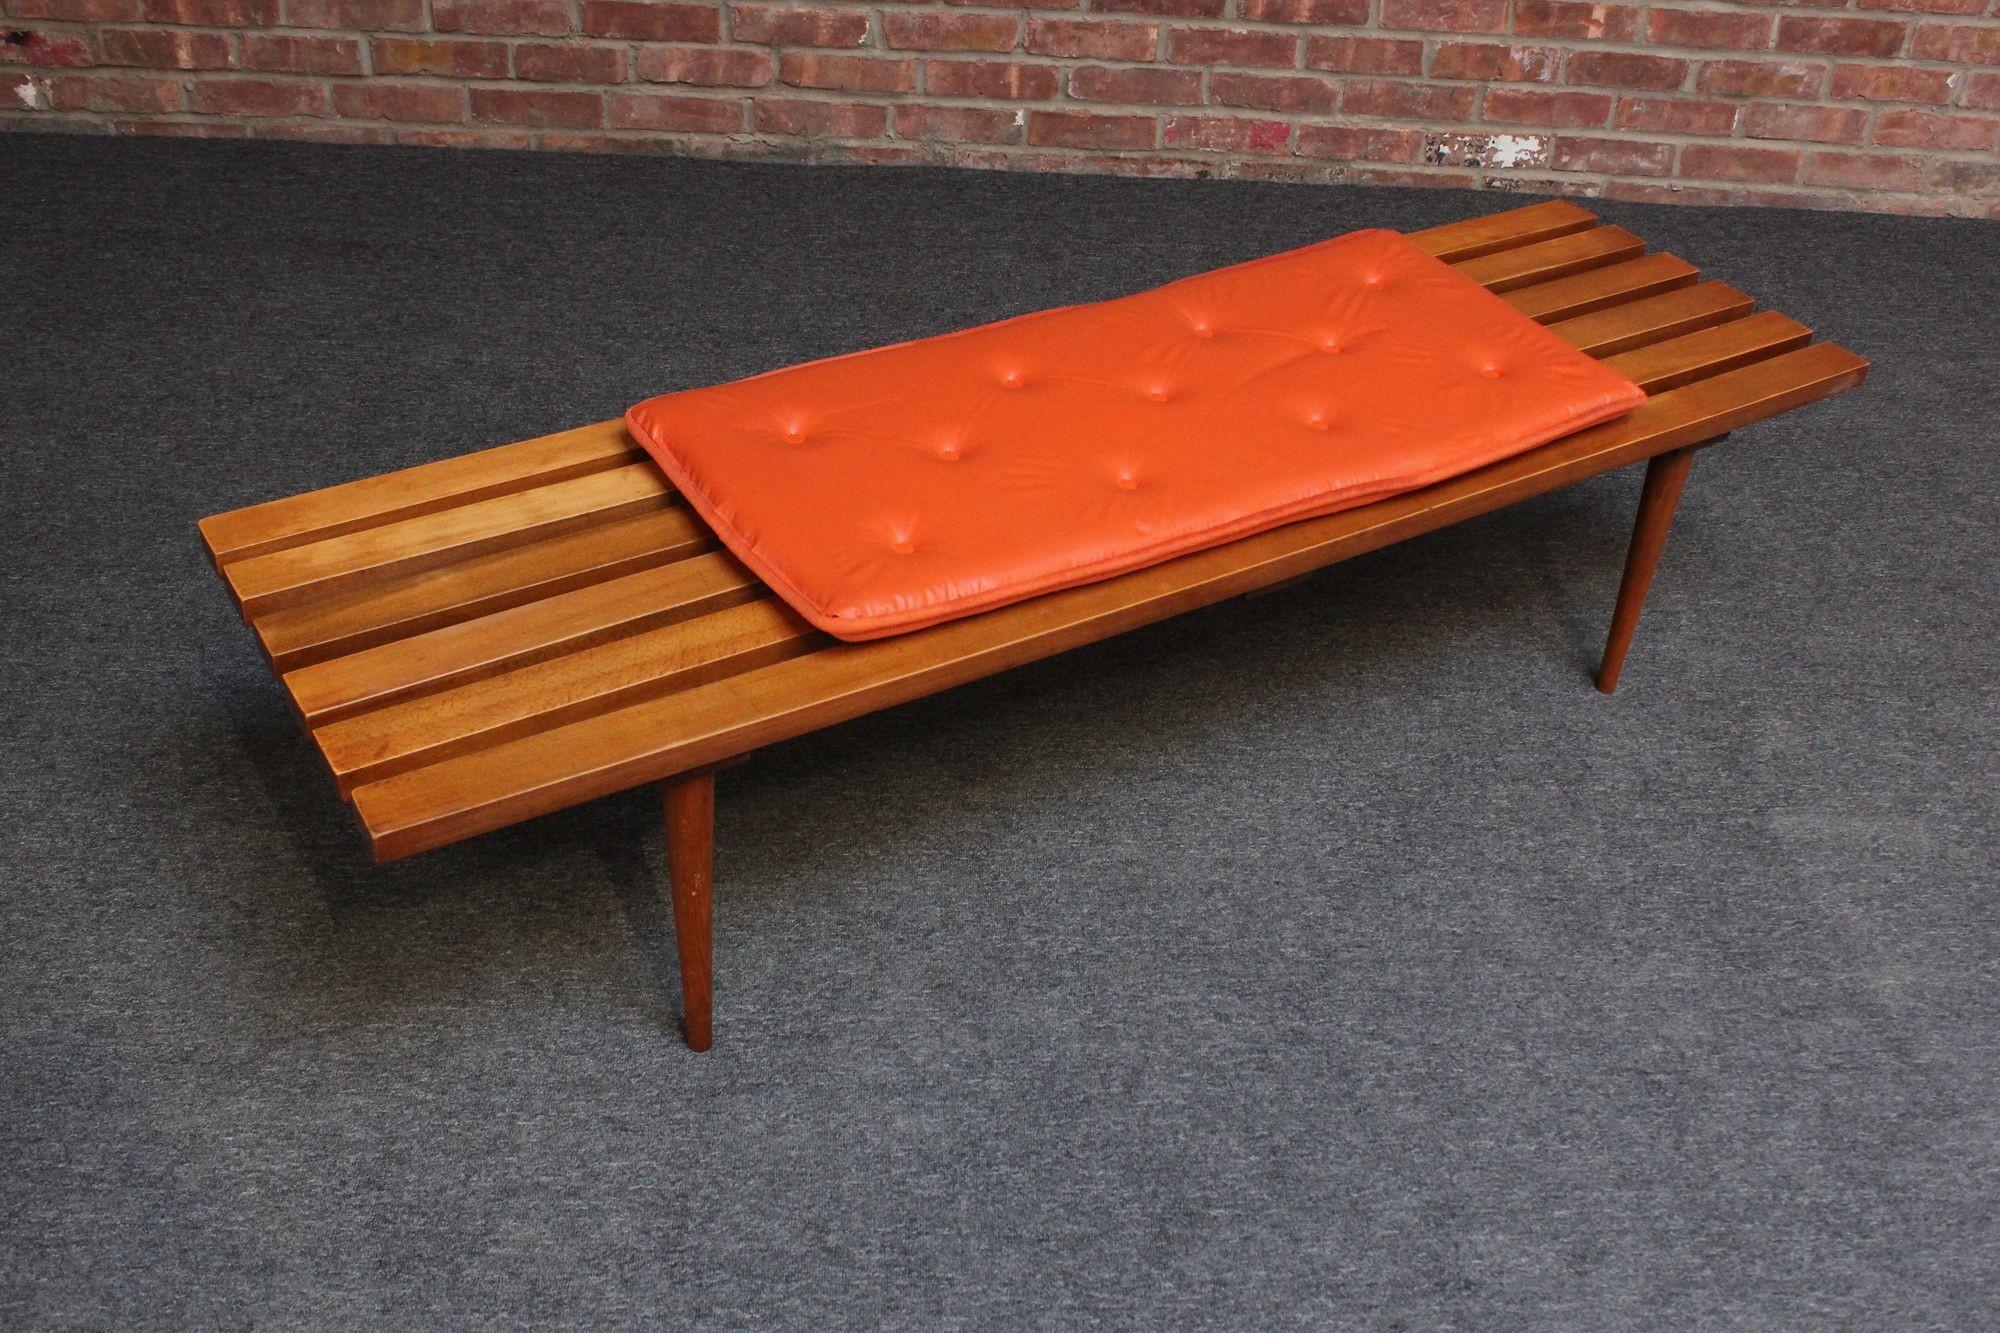 American Mid-Century Modern Slat Oak Bench / Coffee Table with Tapered Legs and Cushion For Sale